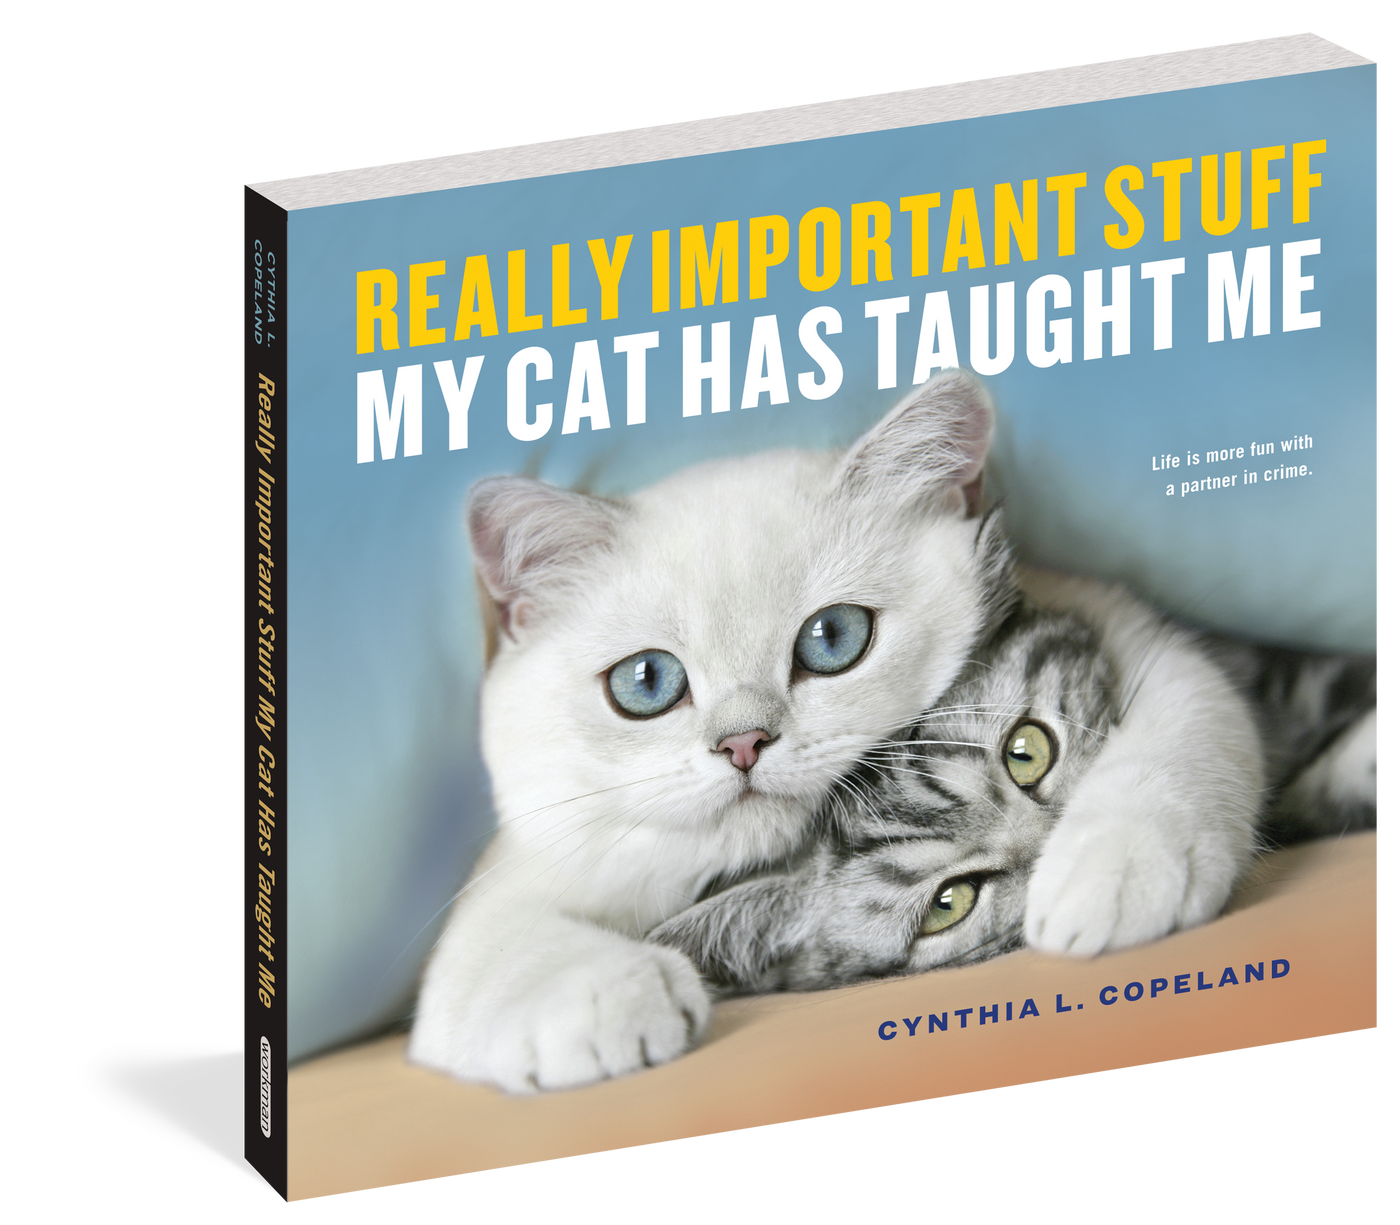 Really Important Stuff My Cat Has Taught Me book